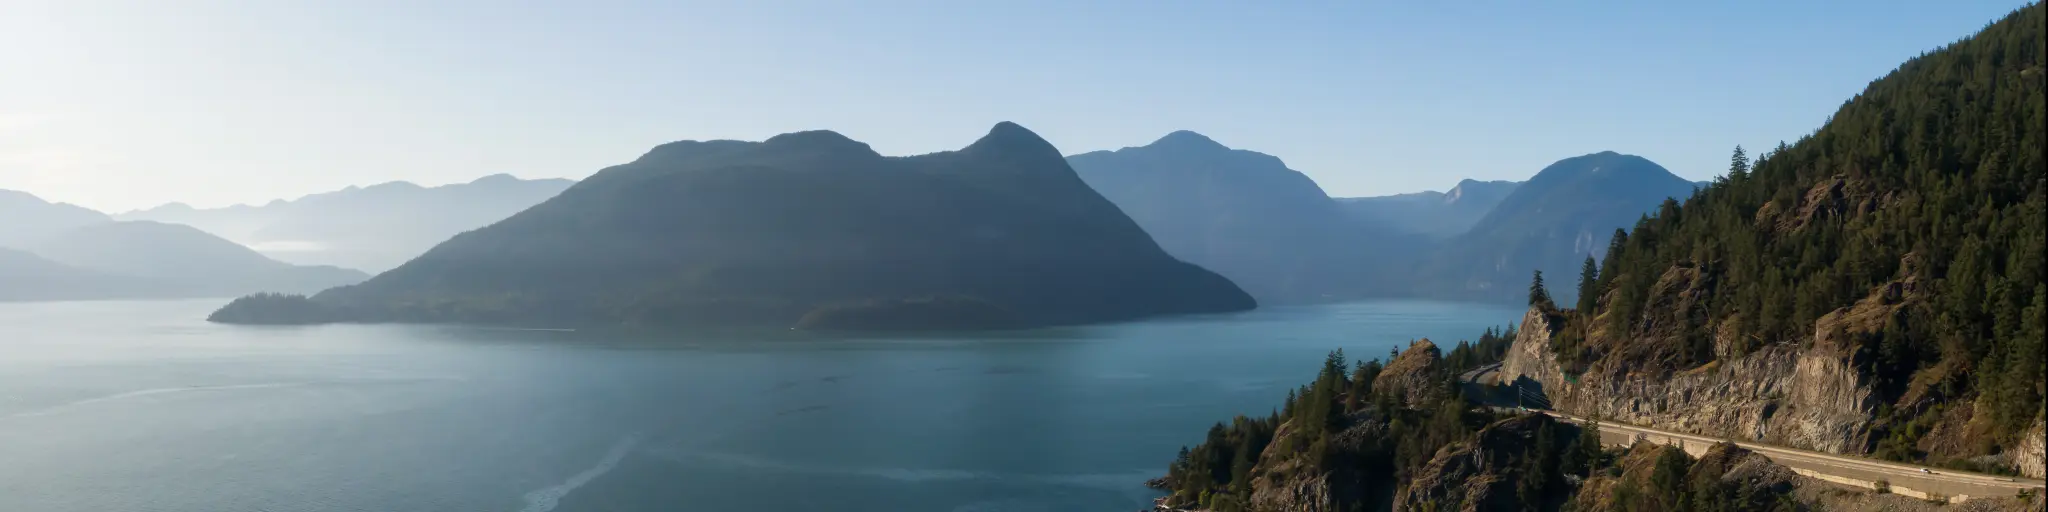 Sea to Sky Highway in Howe Sound, north of Vancouver - one of the most scenic roads to drive across Canada